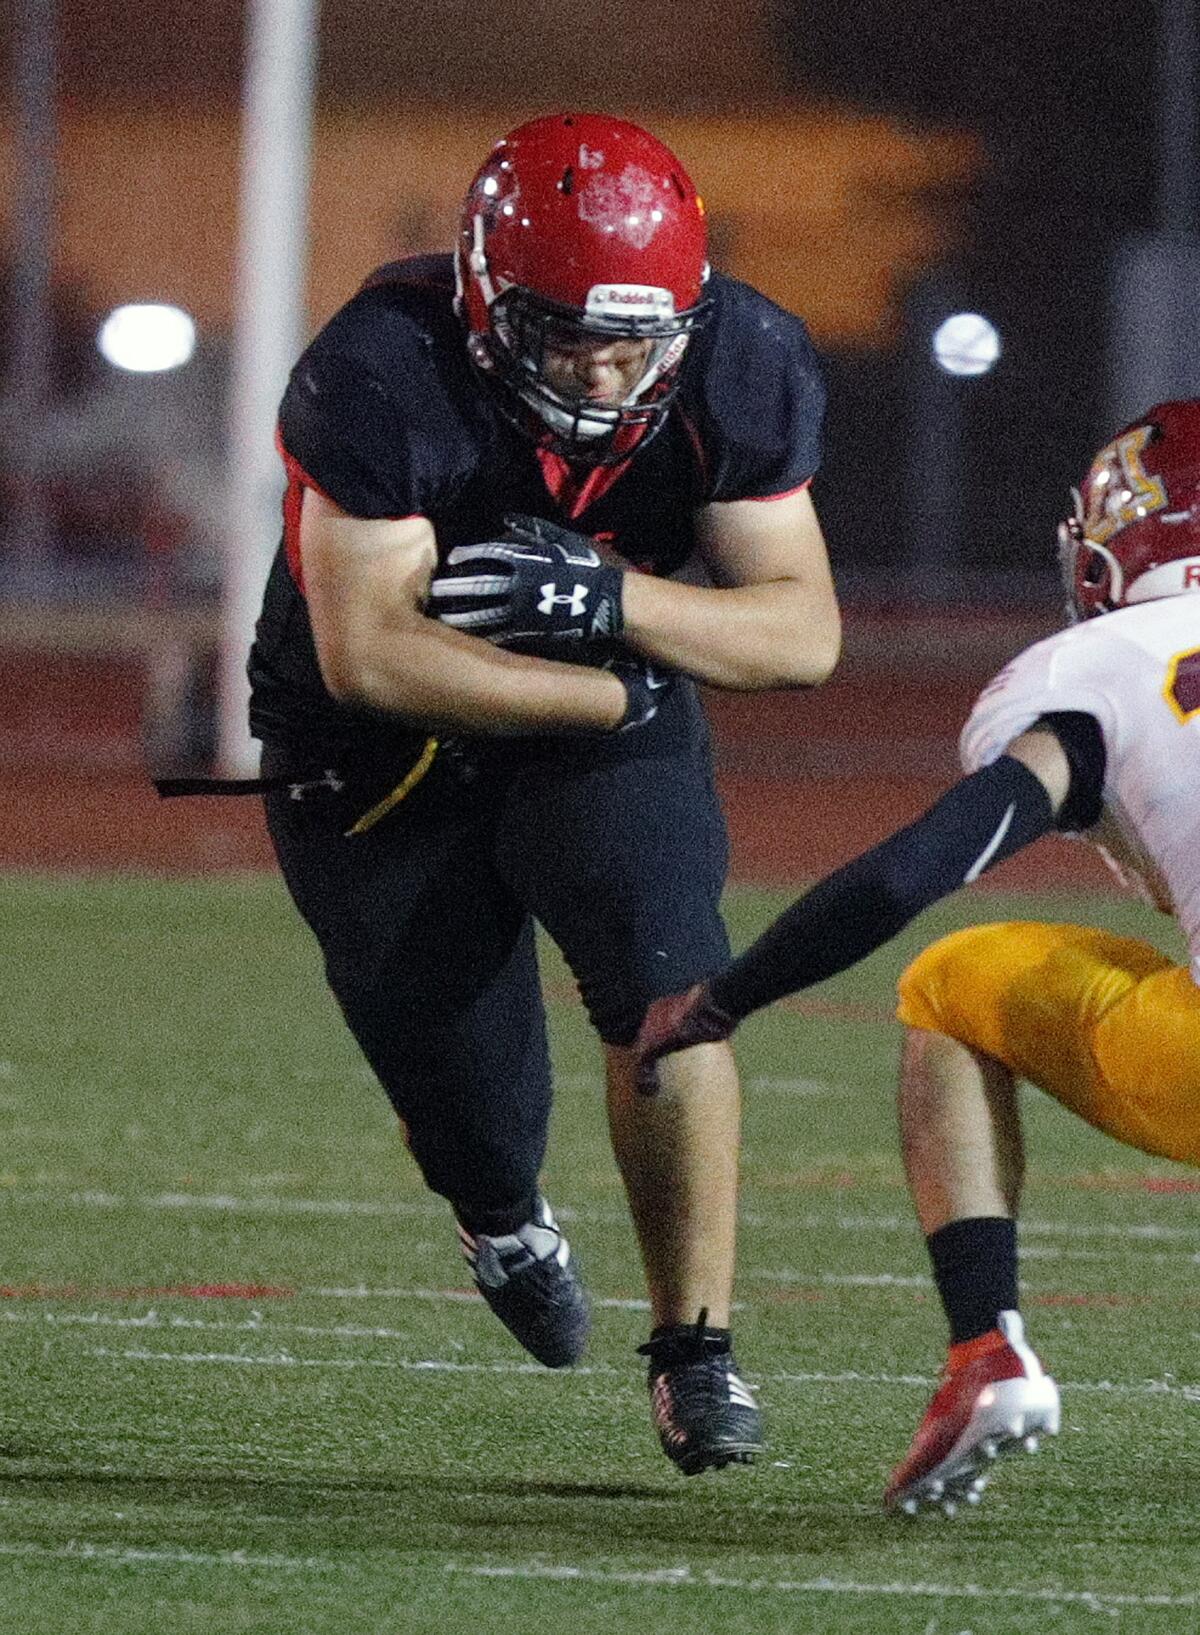 Glendale's Dennis Perez carries the ball against Arcadia in a Pacific League football game at Glendale High School on Thursday, October 3, 2019.